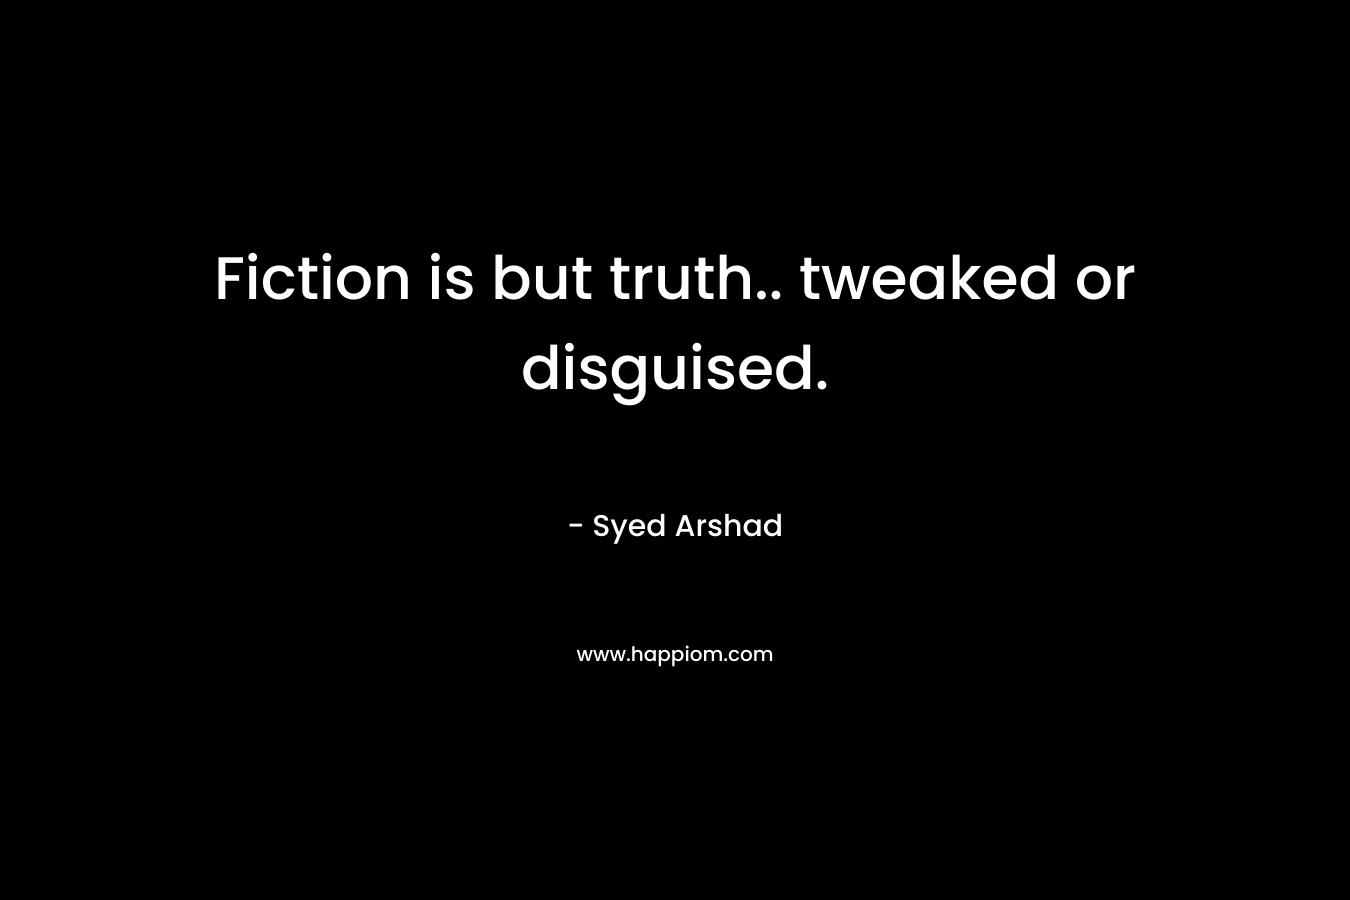 Fiction is but truth.. tweaked or disguised.